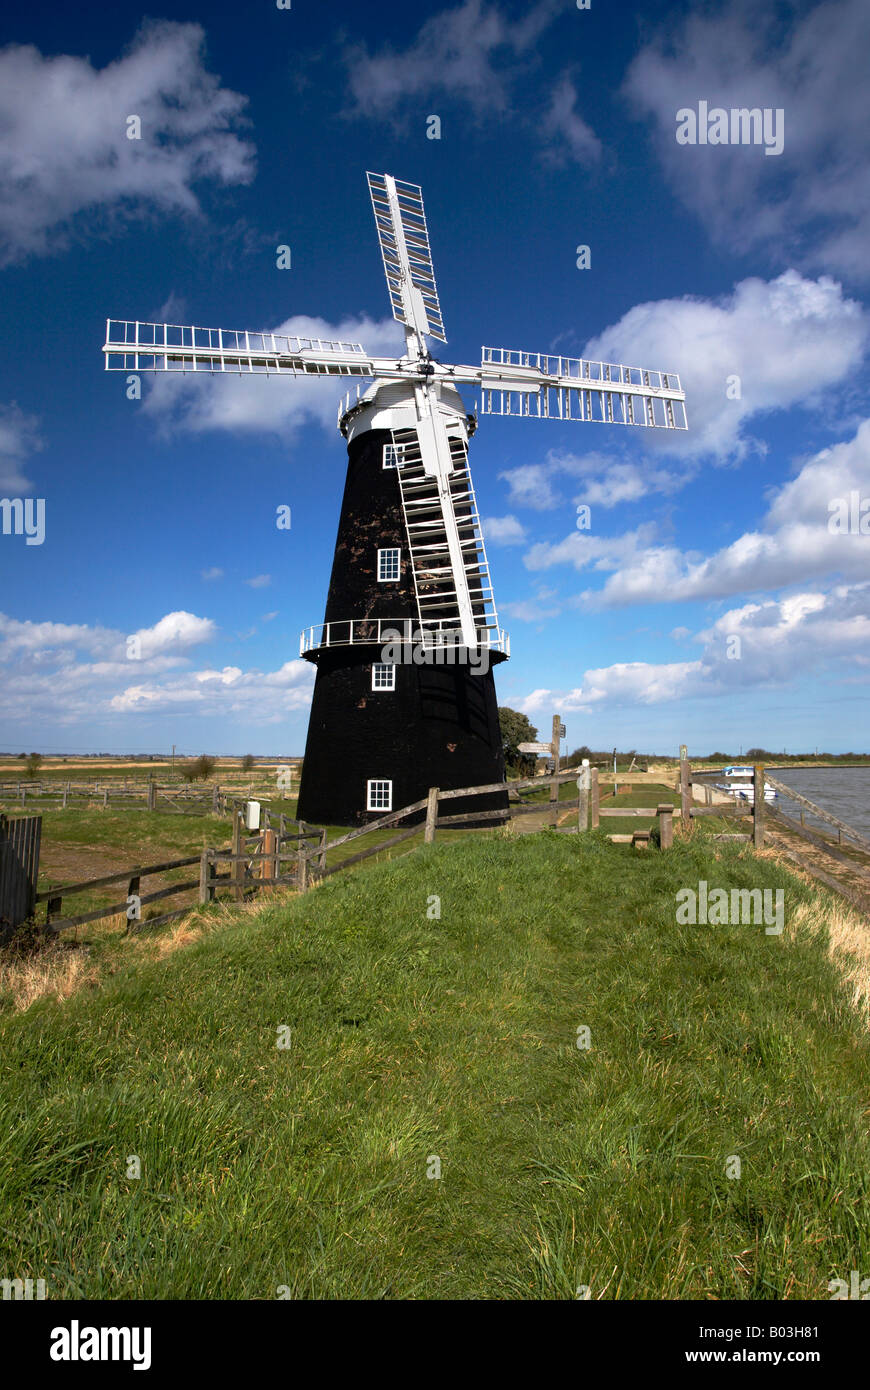 The recently restored Berney Arms windmill on the Halvergate Marshes, Norfolk Broads Stock Photo